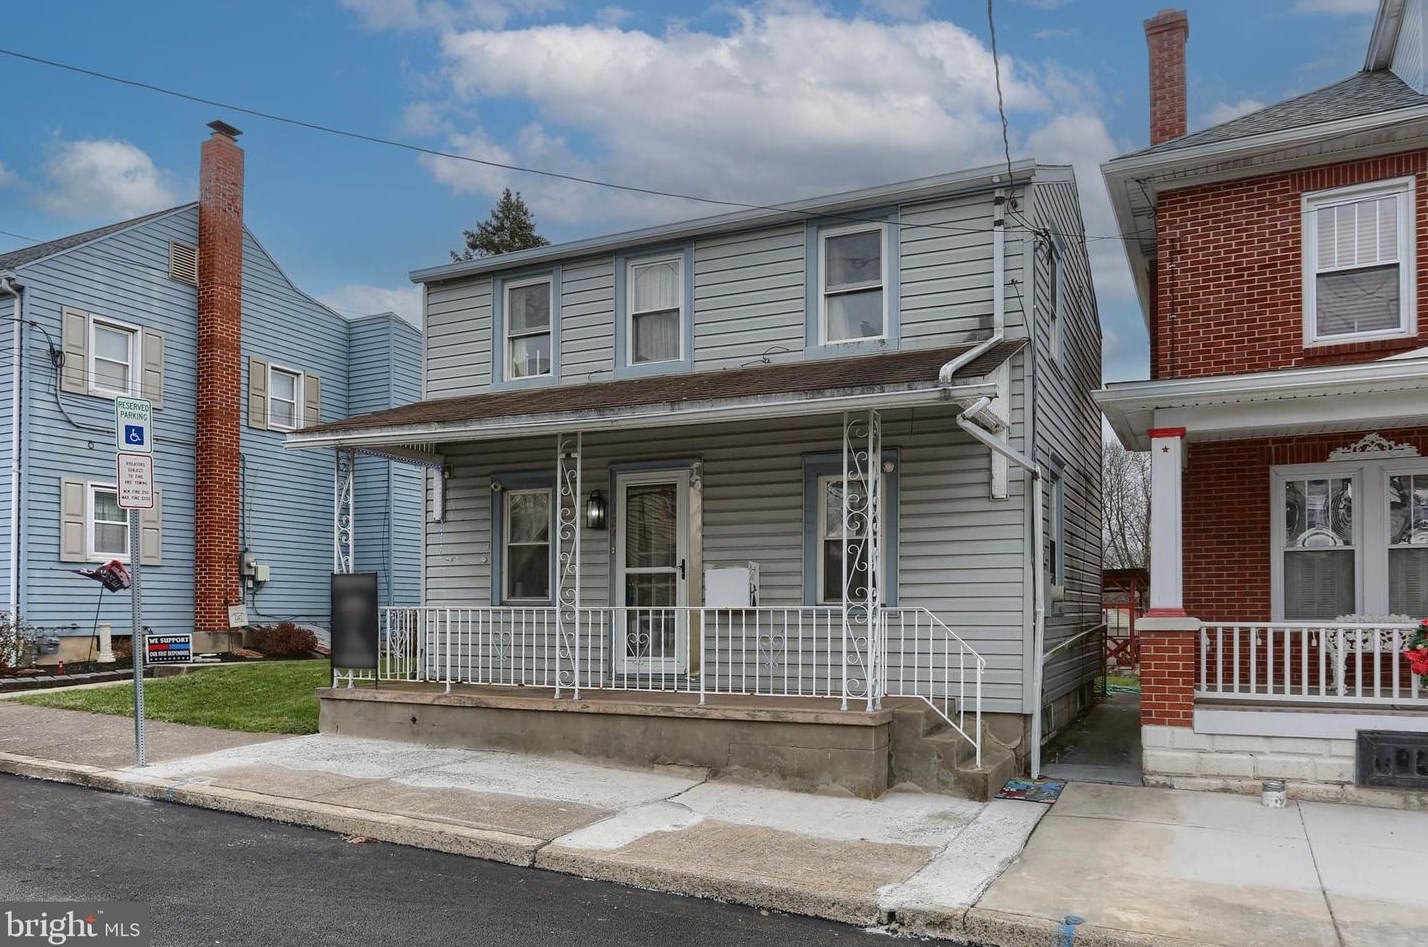 124 Water St, Hbg Inter Airp, PA 17057